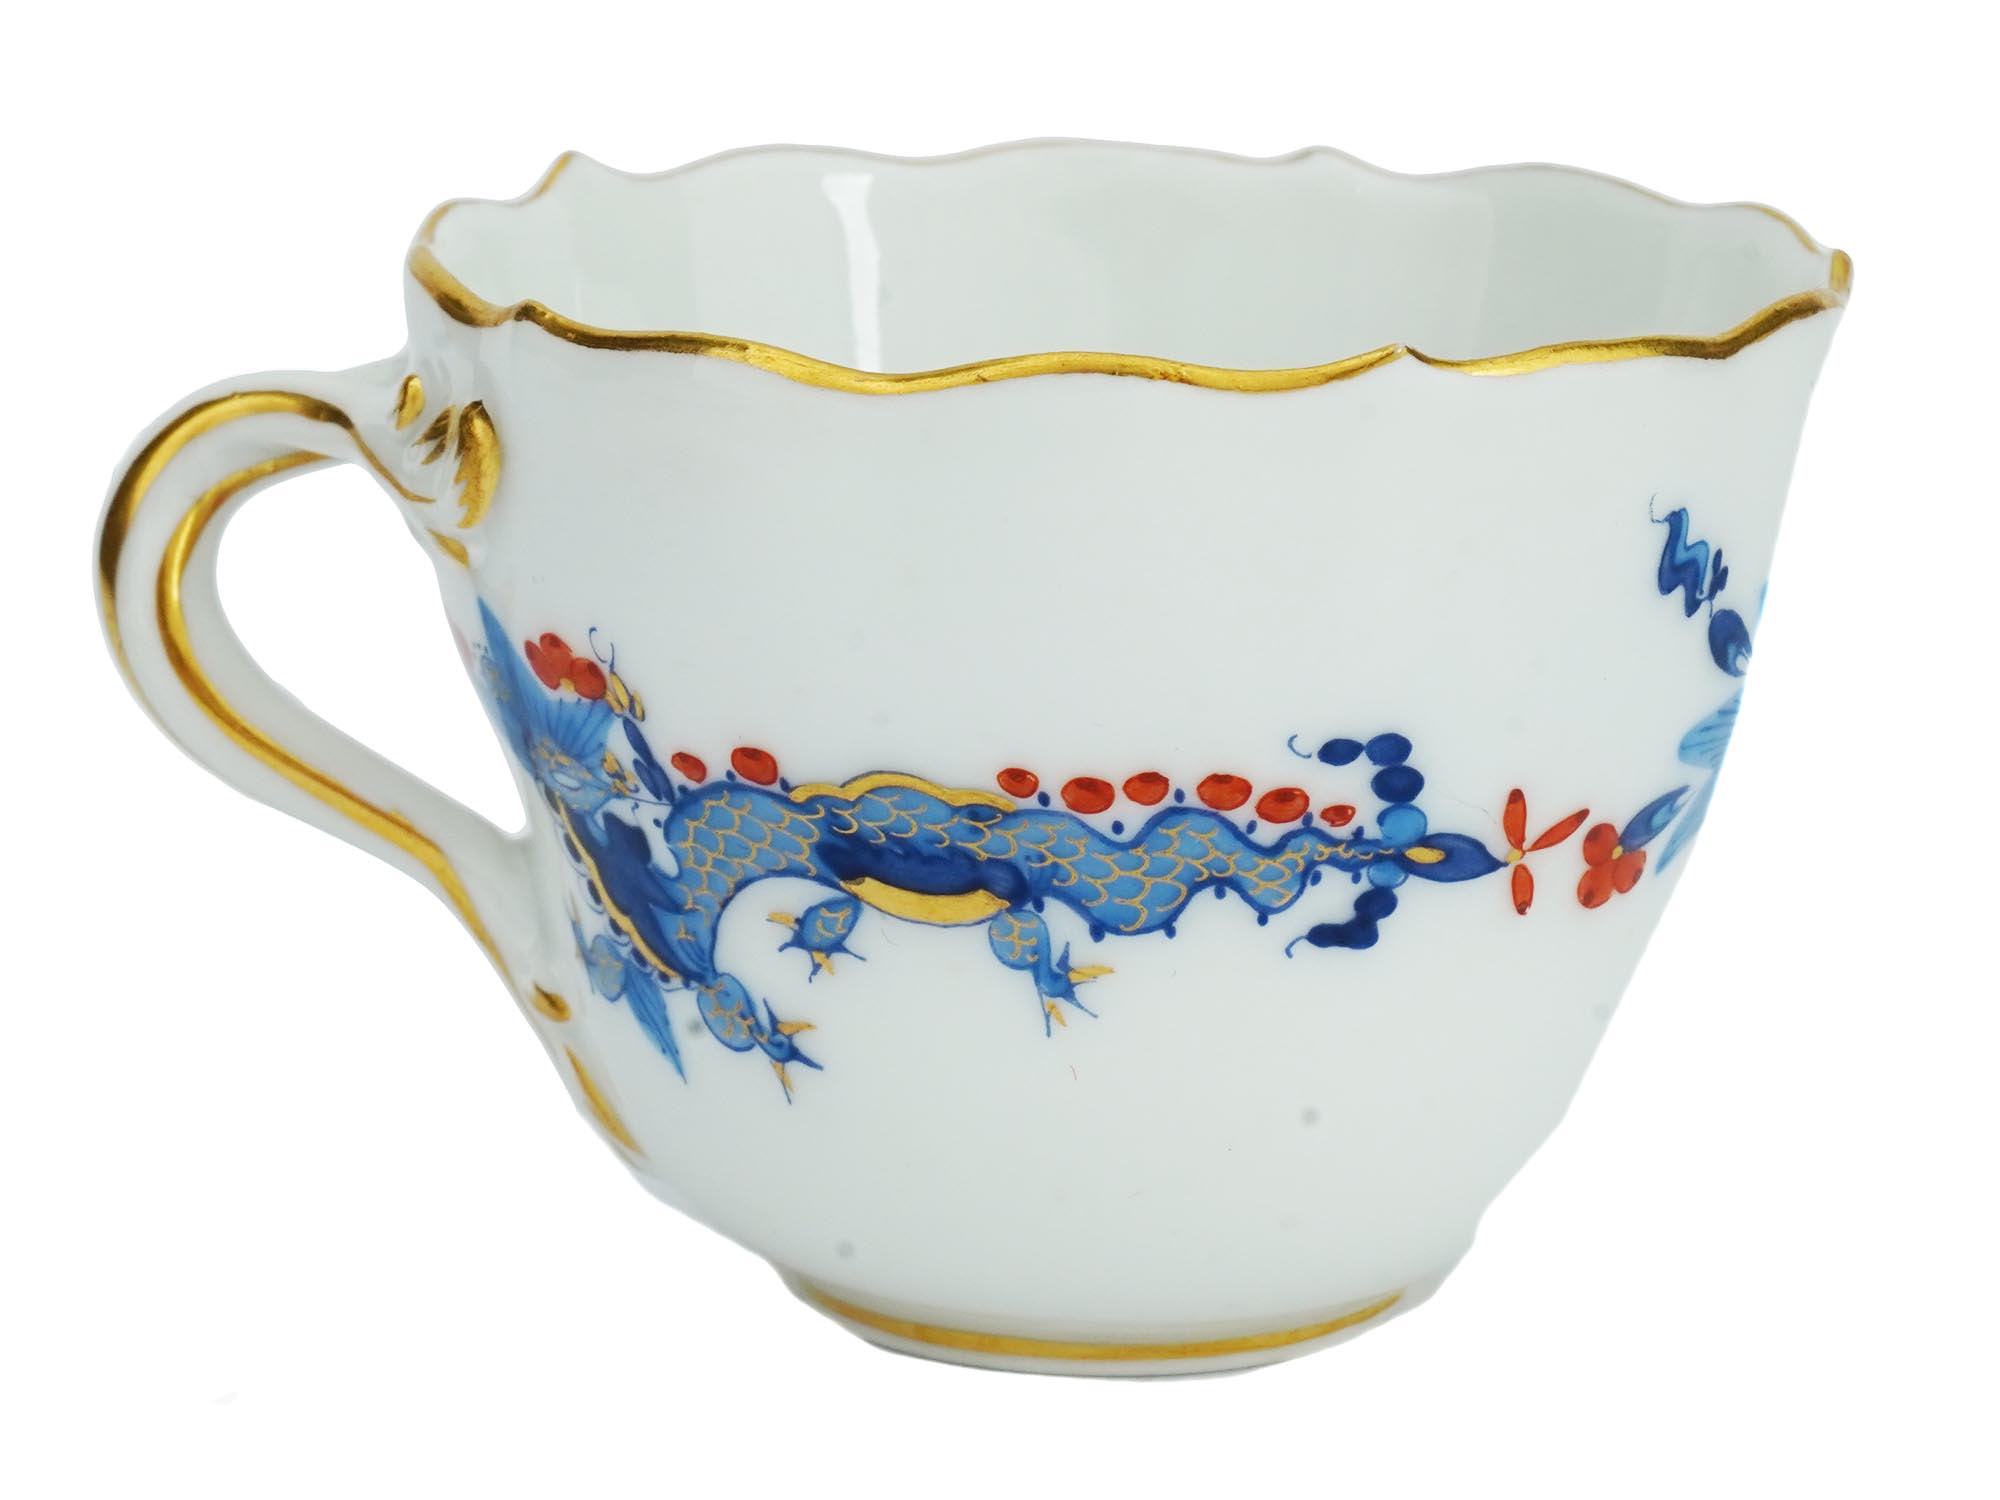 GERMAN MEISSEN PORCELAIN CUP AND SAUCER W BLUE DRAGONS PIC-7